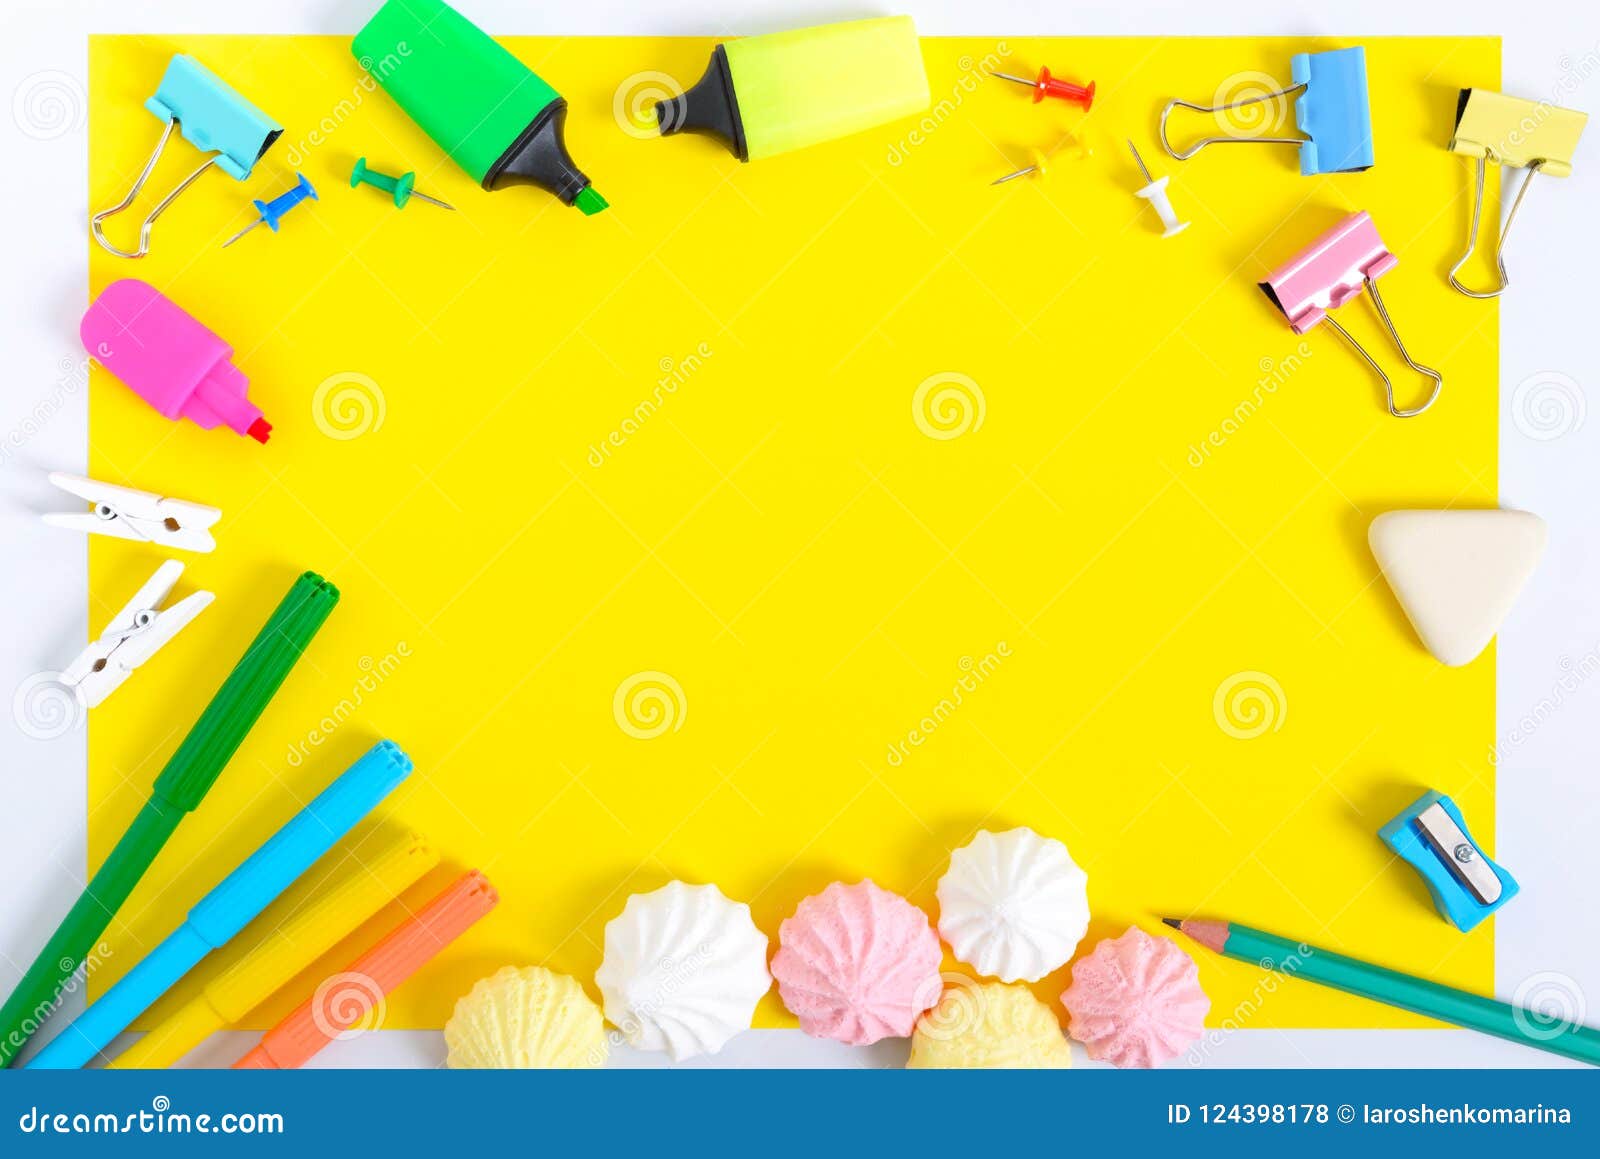 School Accessories on a Yellow Background. Back To School Concept ...